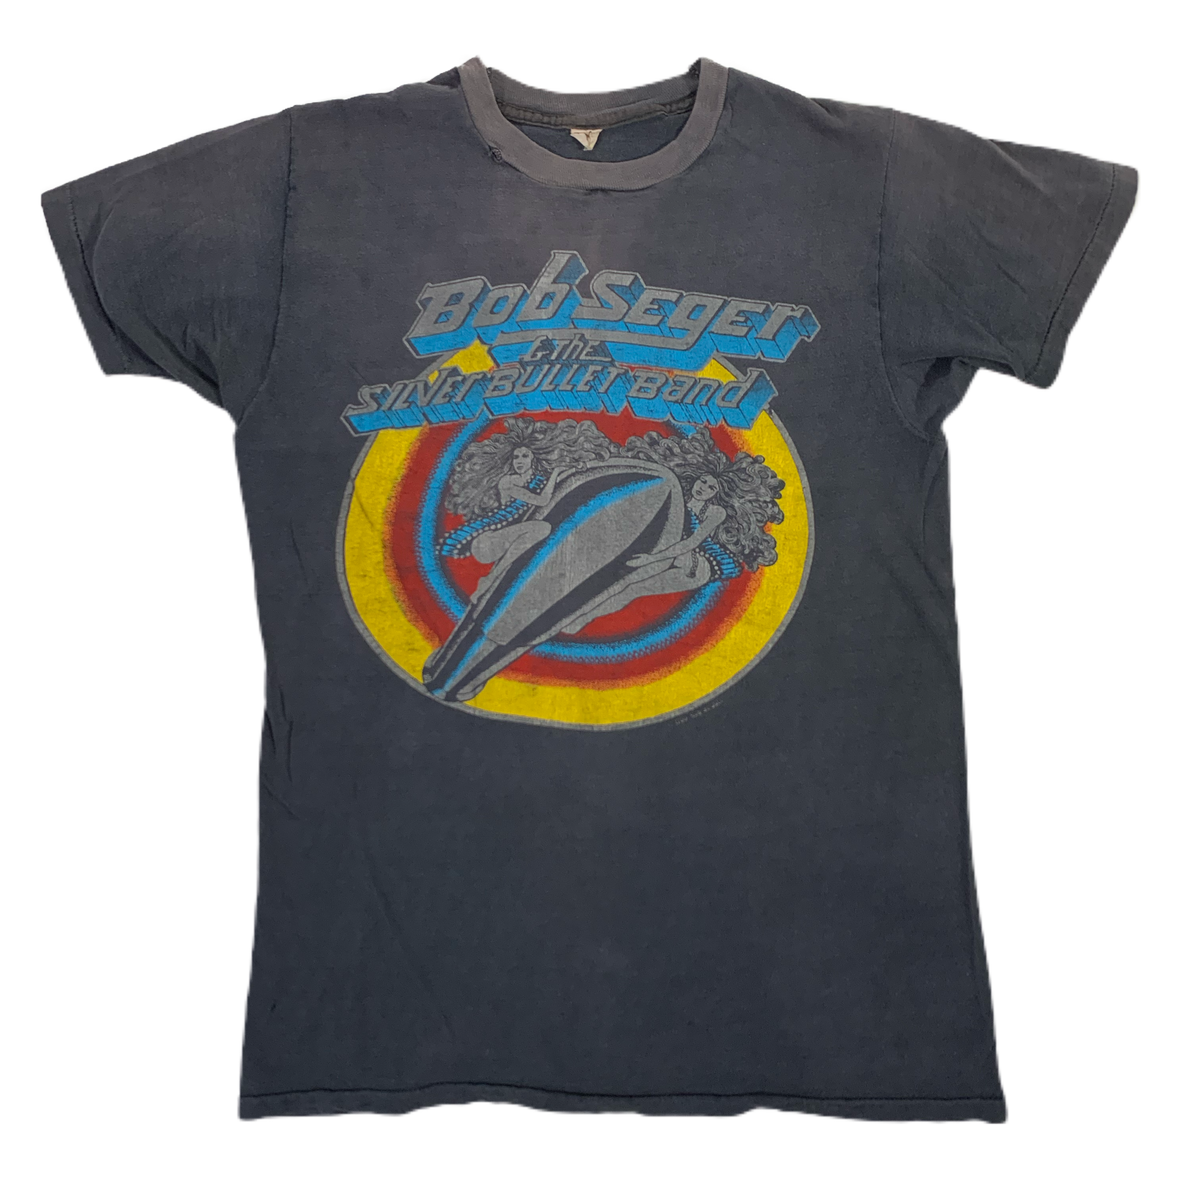 Vintage Bob Seger & The Silver Buller Band “Touring Against The Wind” T ...